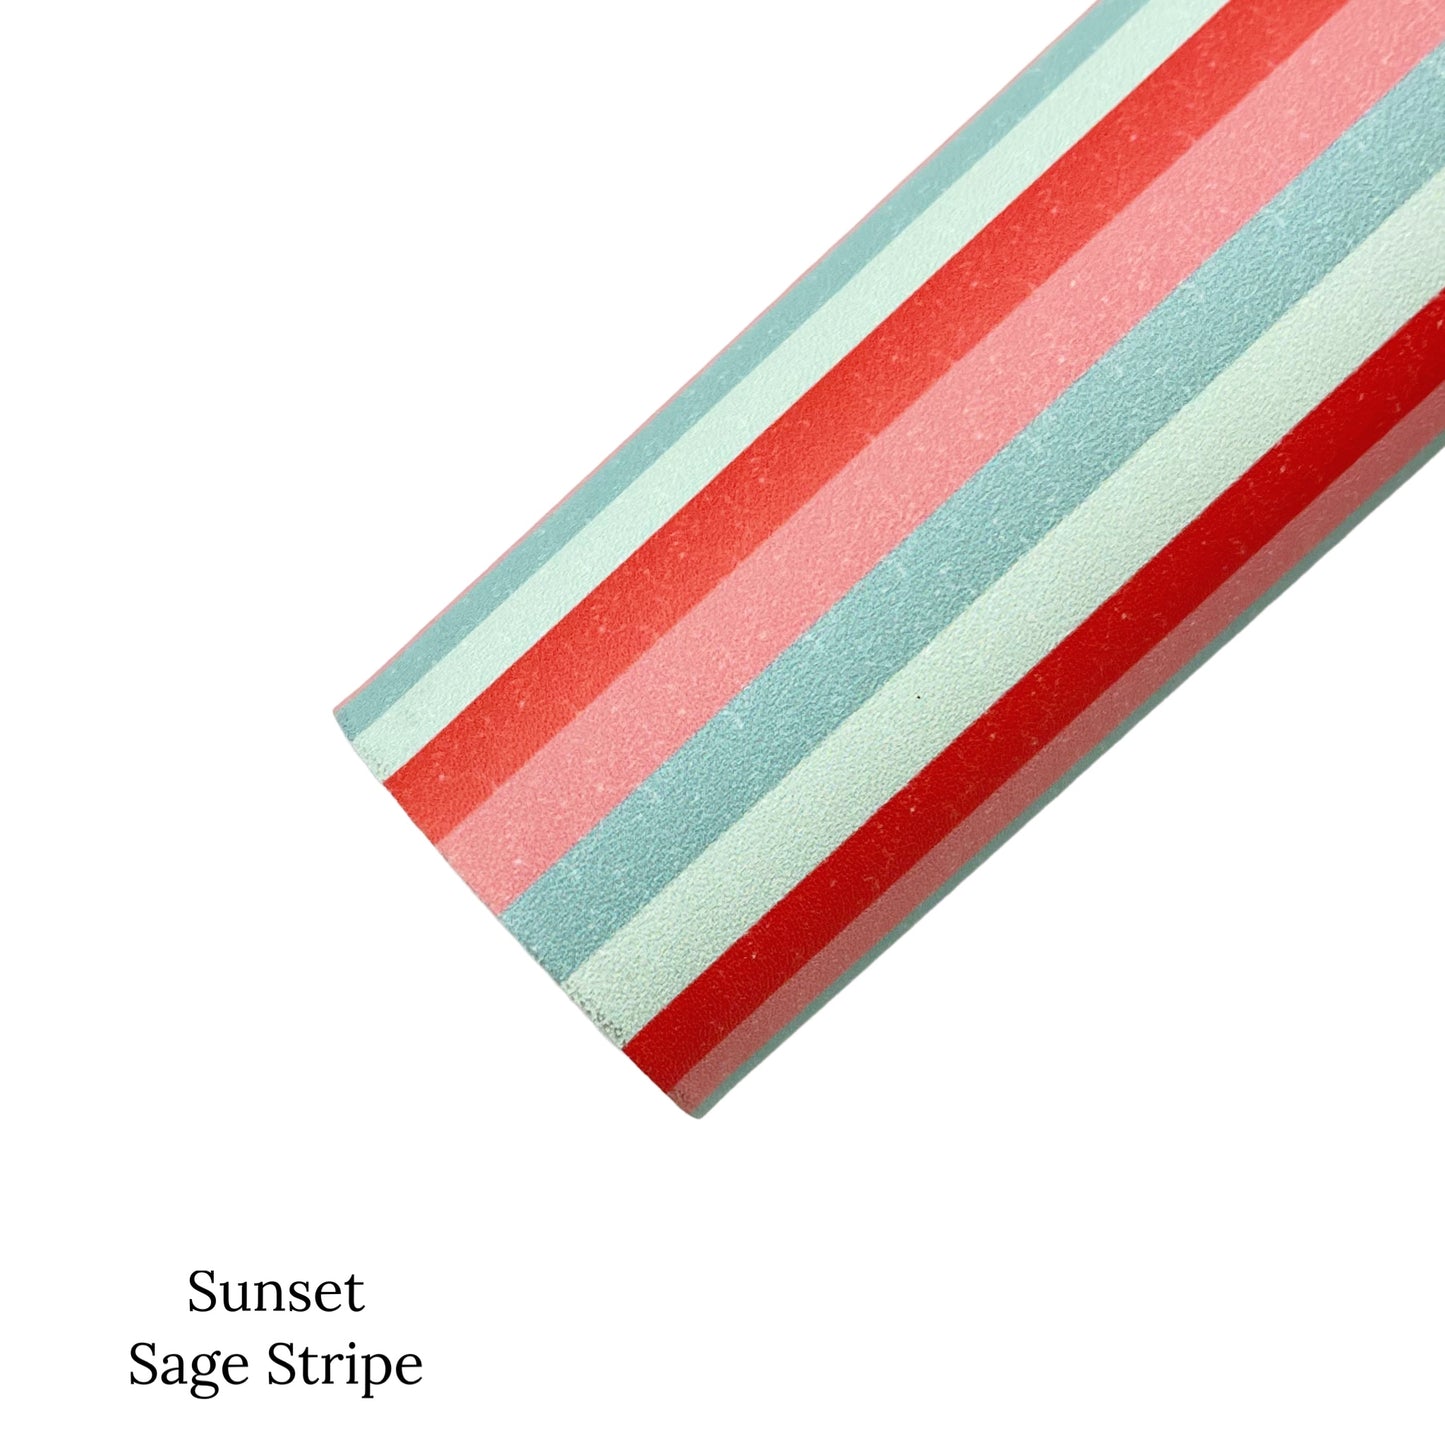 Rolled sage, coral, peach, and pale green strip patterned faux leather sheet.